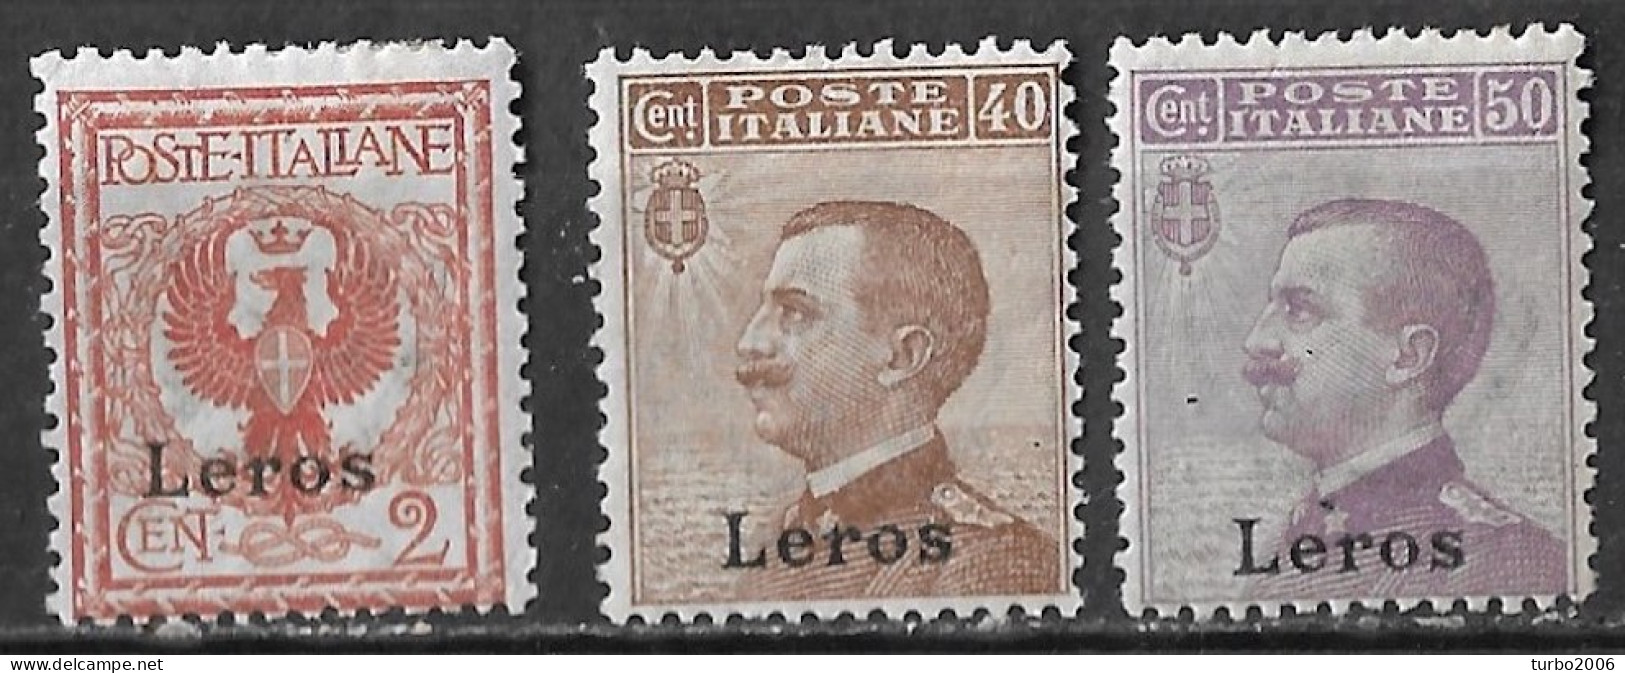 DODECANESE 1912 Italian Stamps With Black Overprint LEROS 3 Values From The Set Vl. 1-6-7 MH - Dodecaneso